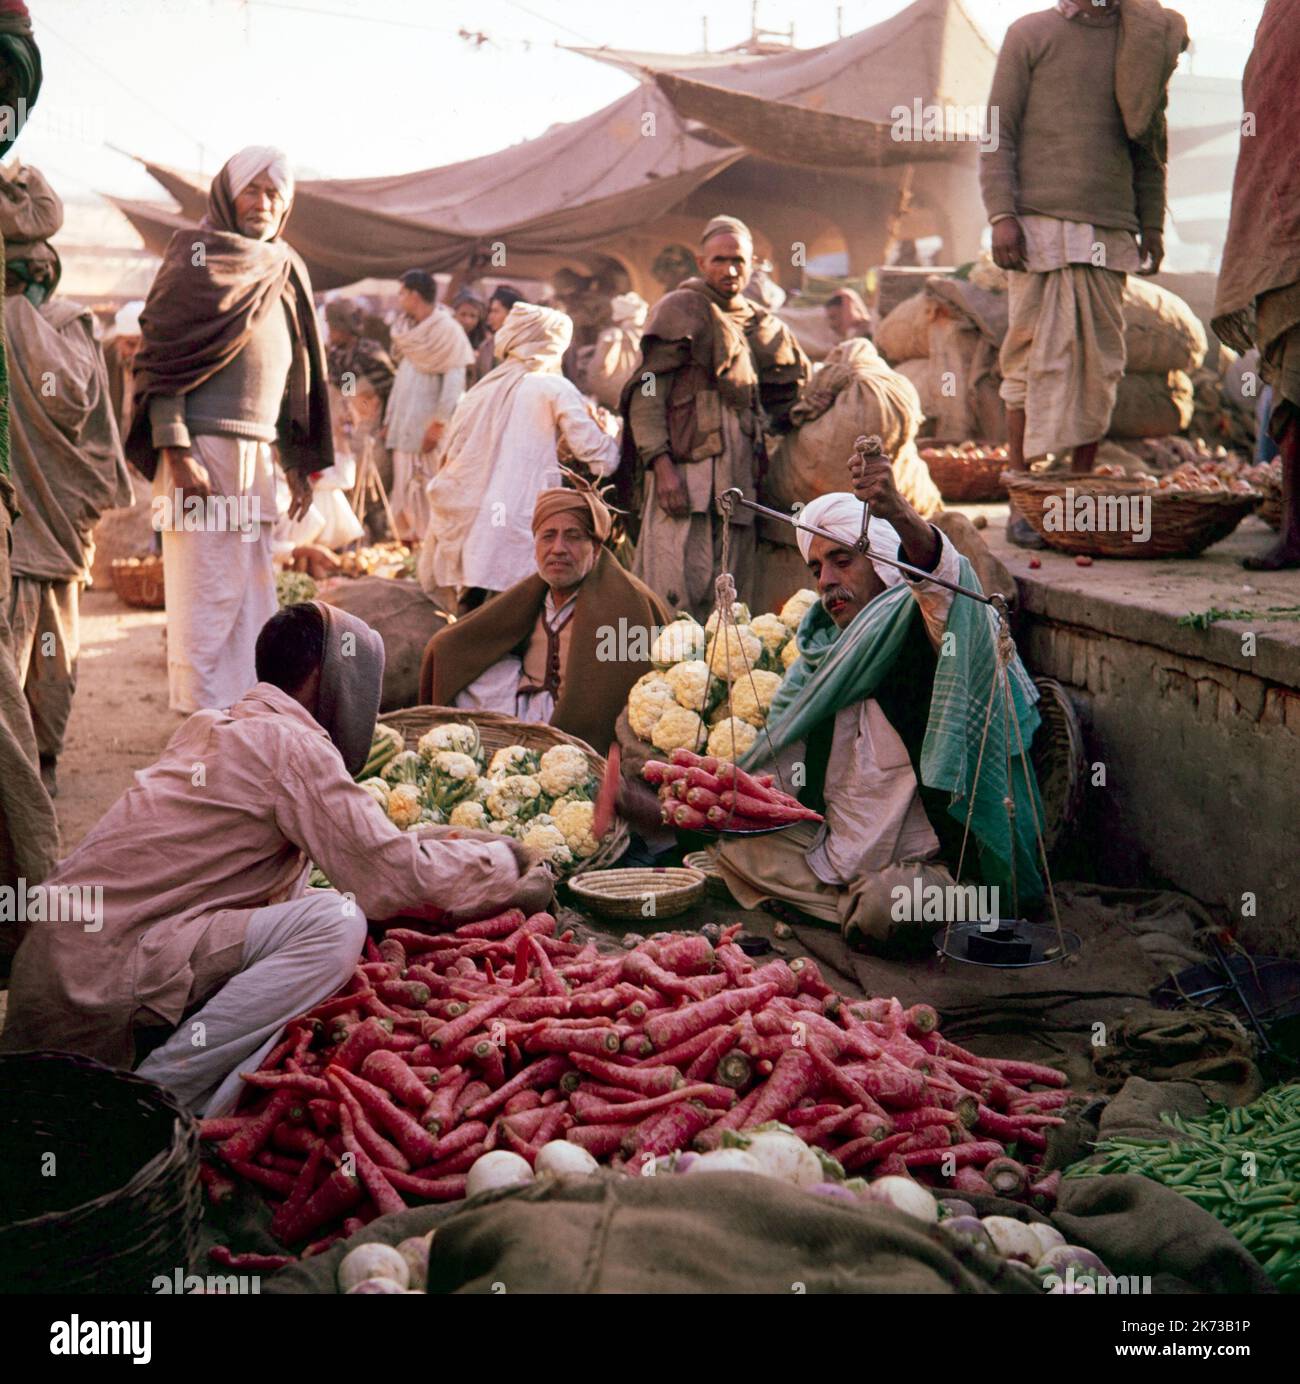 A vintage 1961 colour photograph showing traders in a Subzi Mandi, or Vegetable market, in Delhi, India. Stock Photo